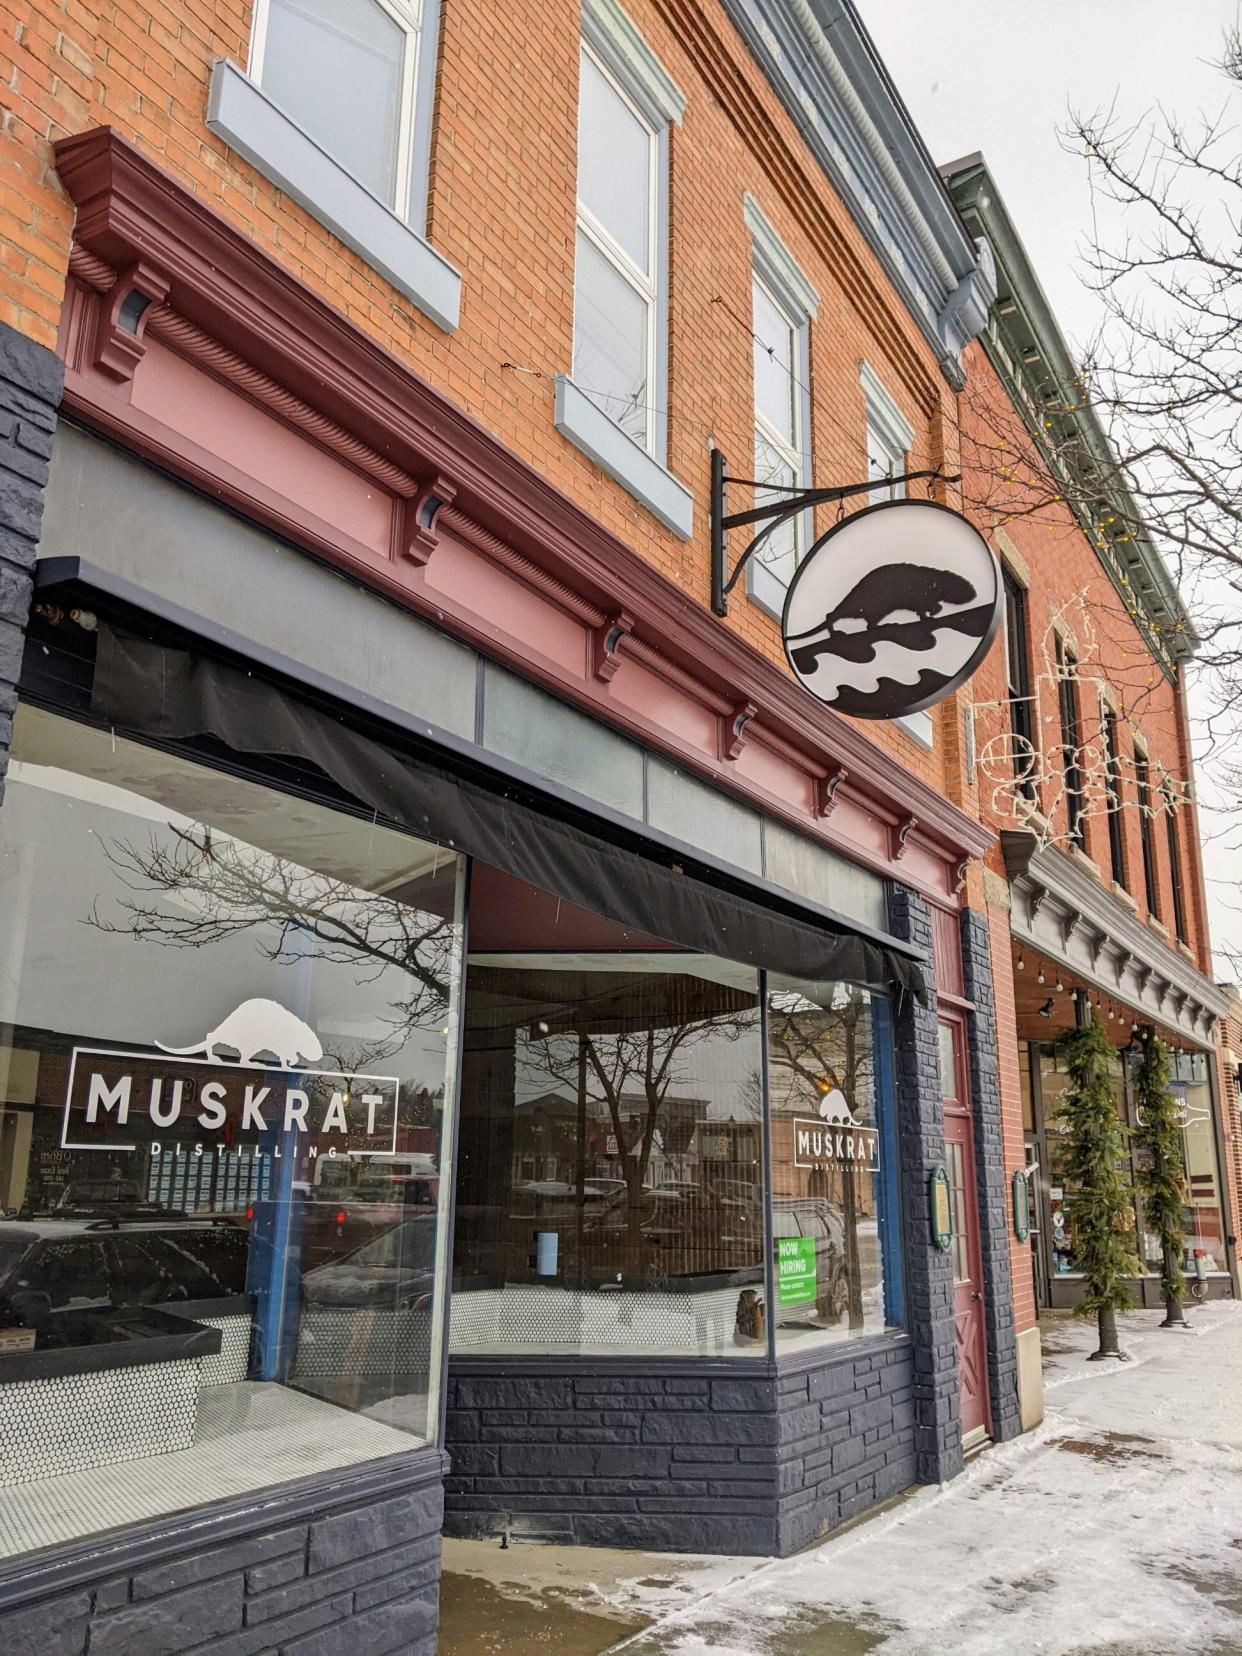 Muskrat Distilling officially opened on Friday, April 22 at 123 Water St.